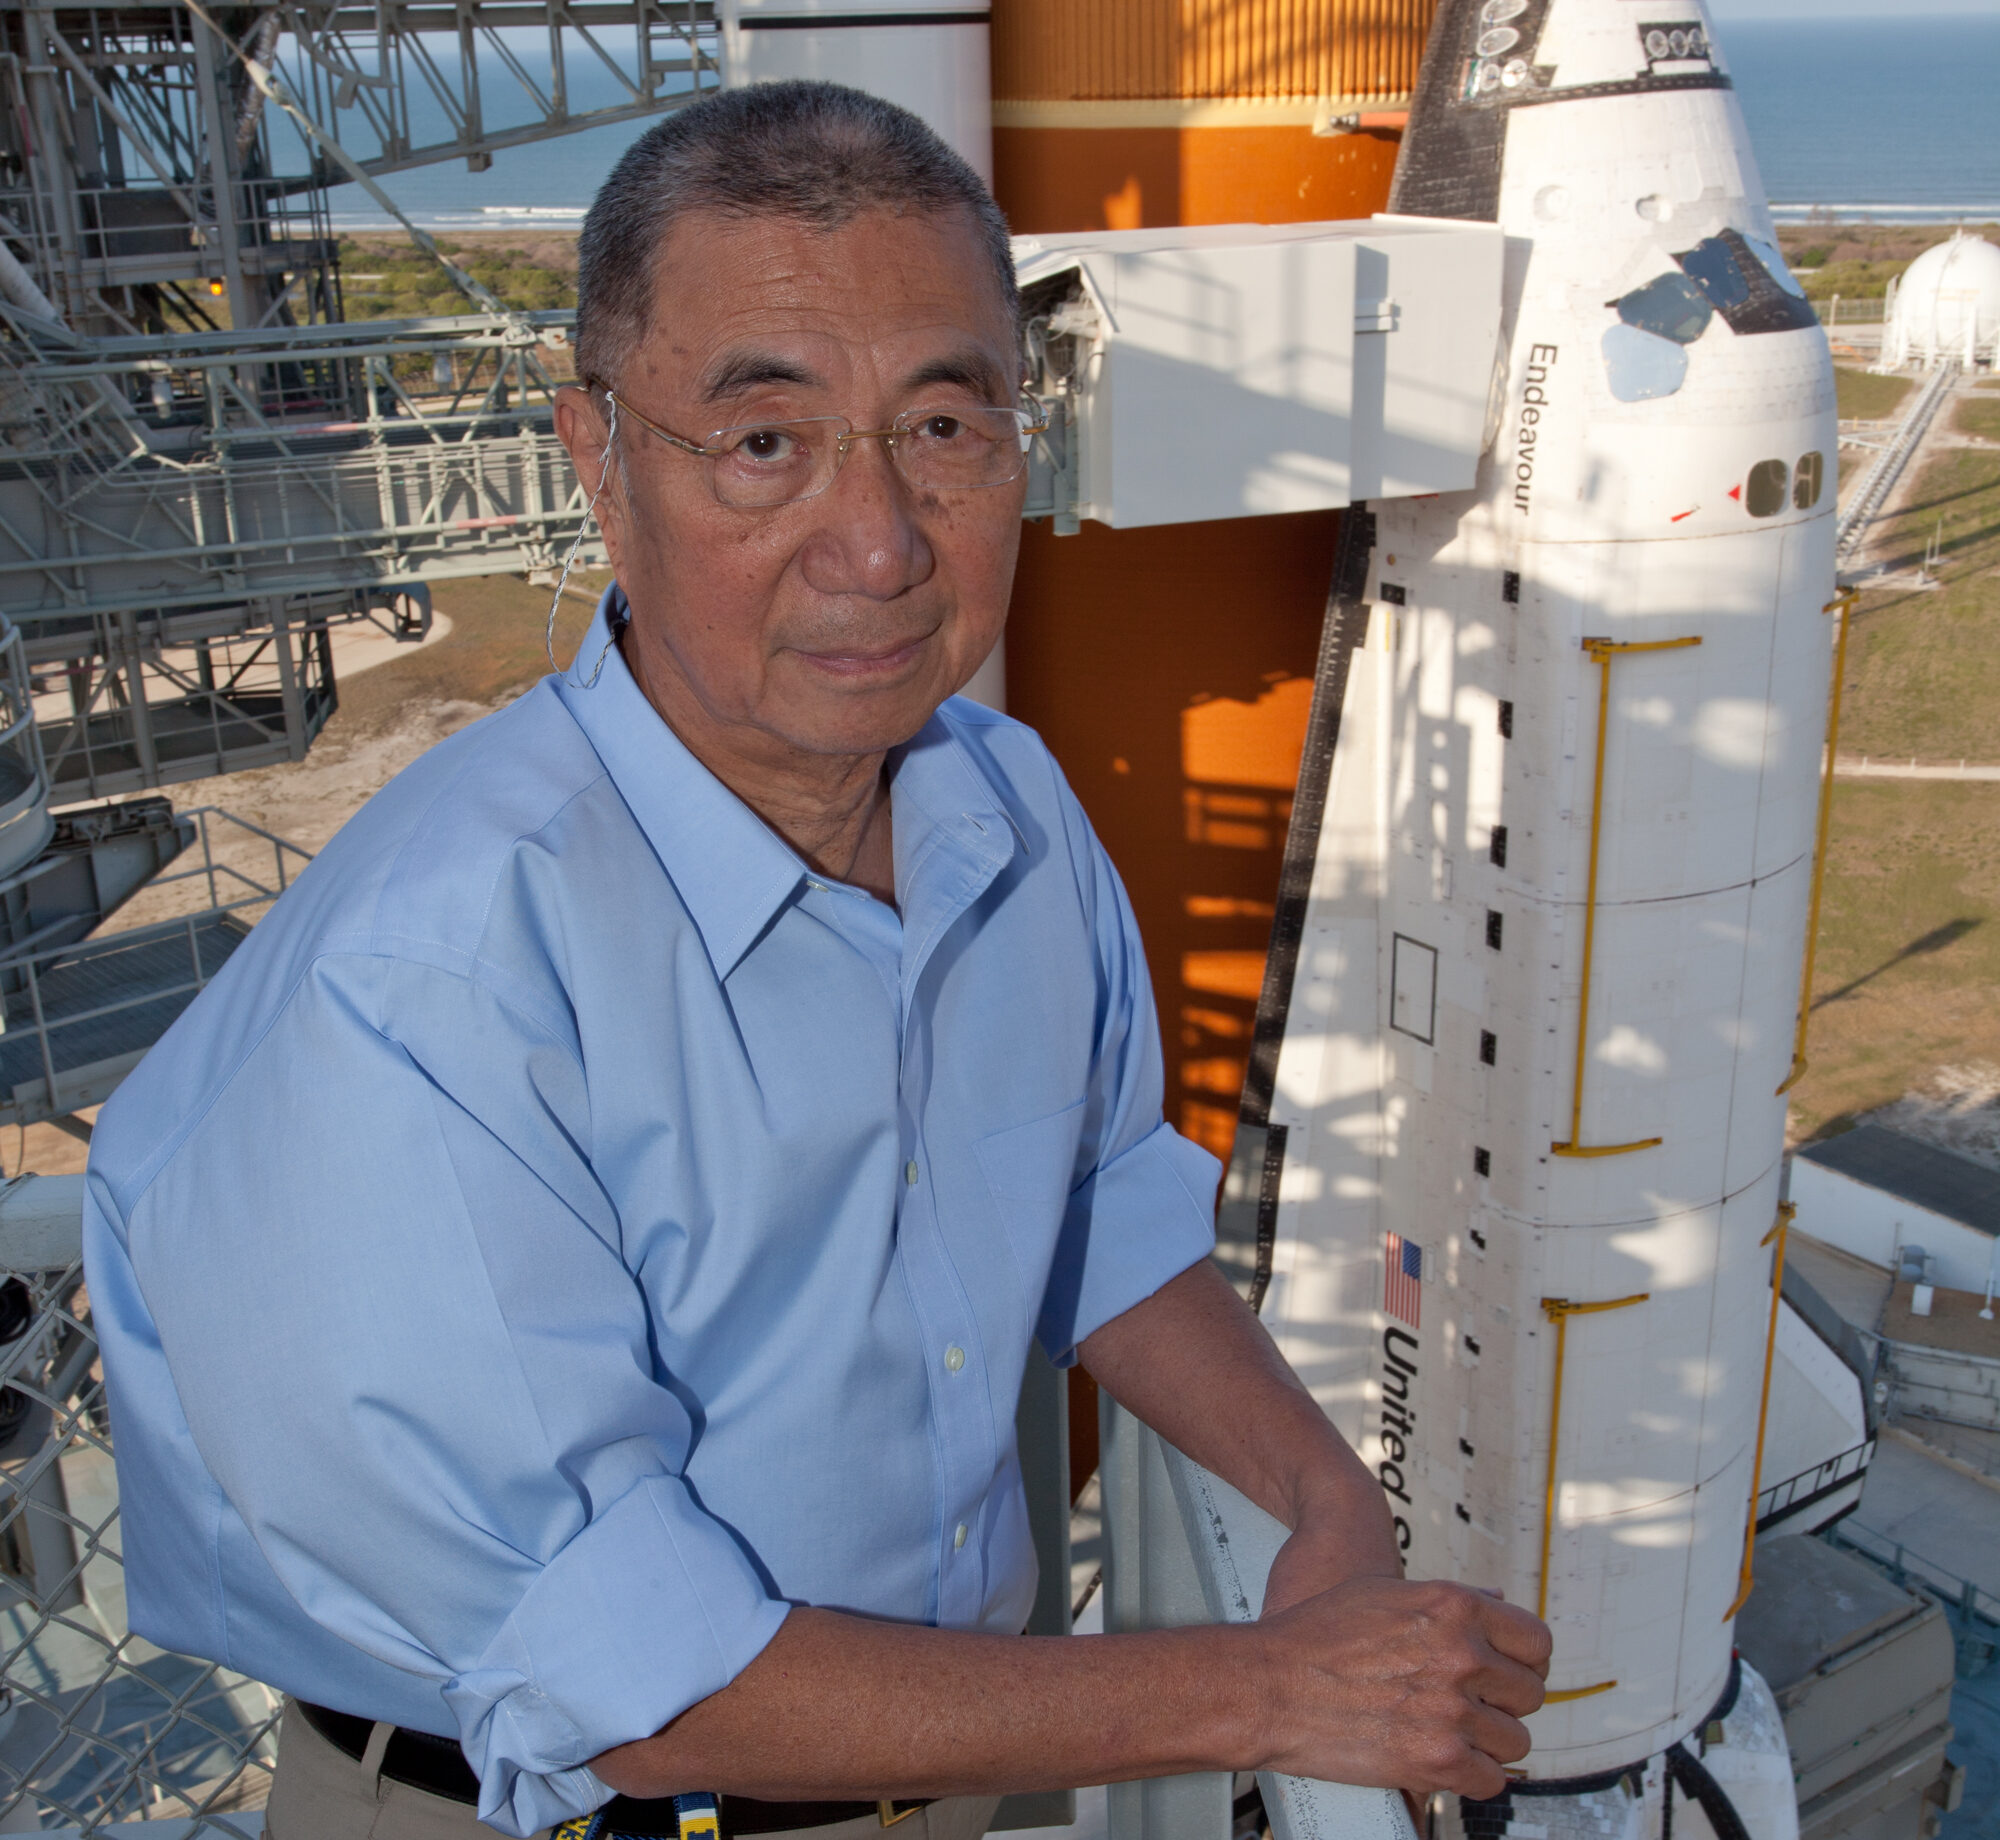 Professor Ting poses in front of the Space Shuttle Endeavor before it launches with AMS-02